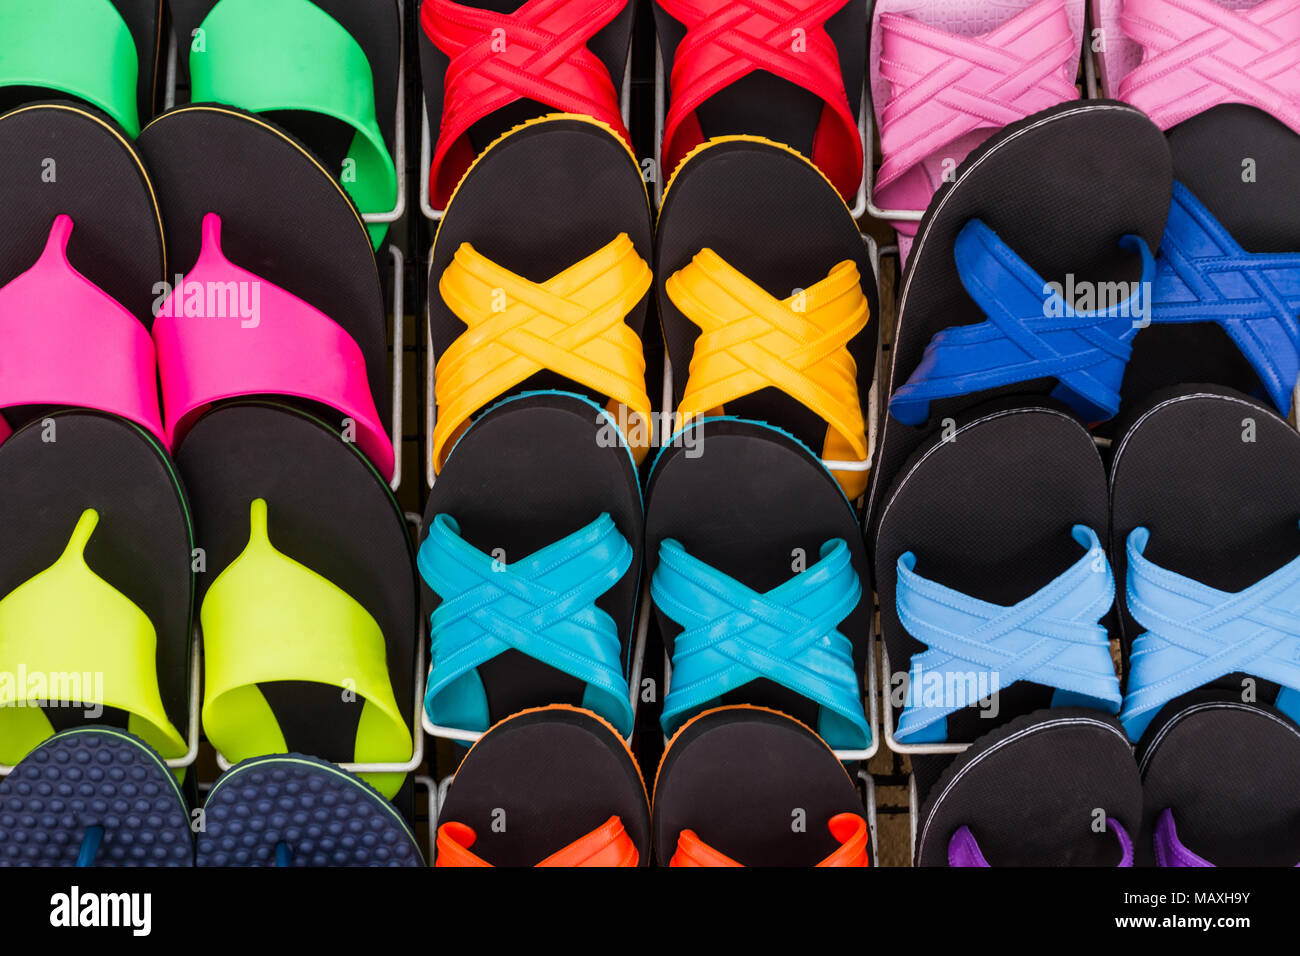 Colorful of flat shoes hanging on shelf for sale, no brand names or copyright objects. Stock Photo